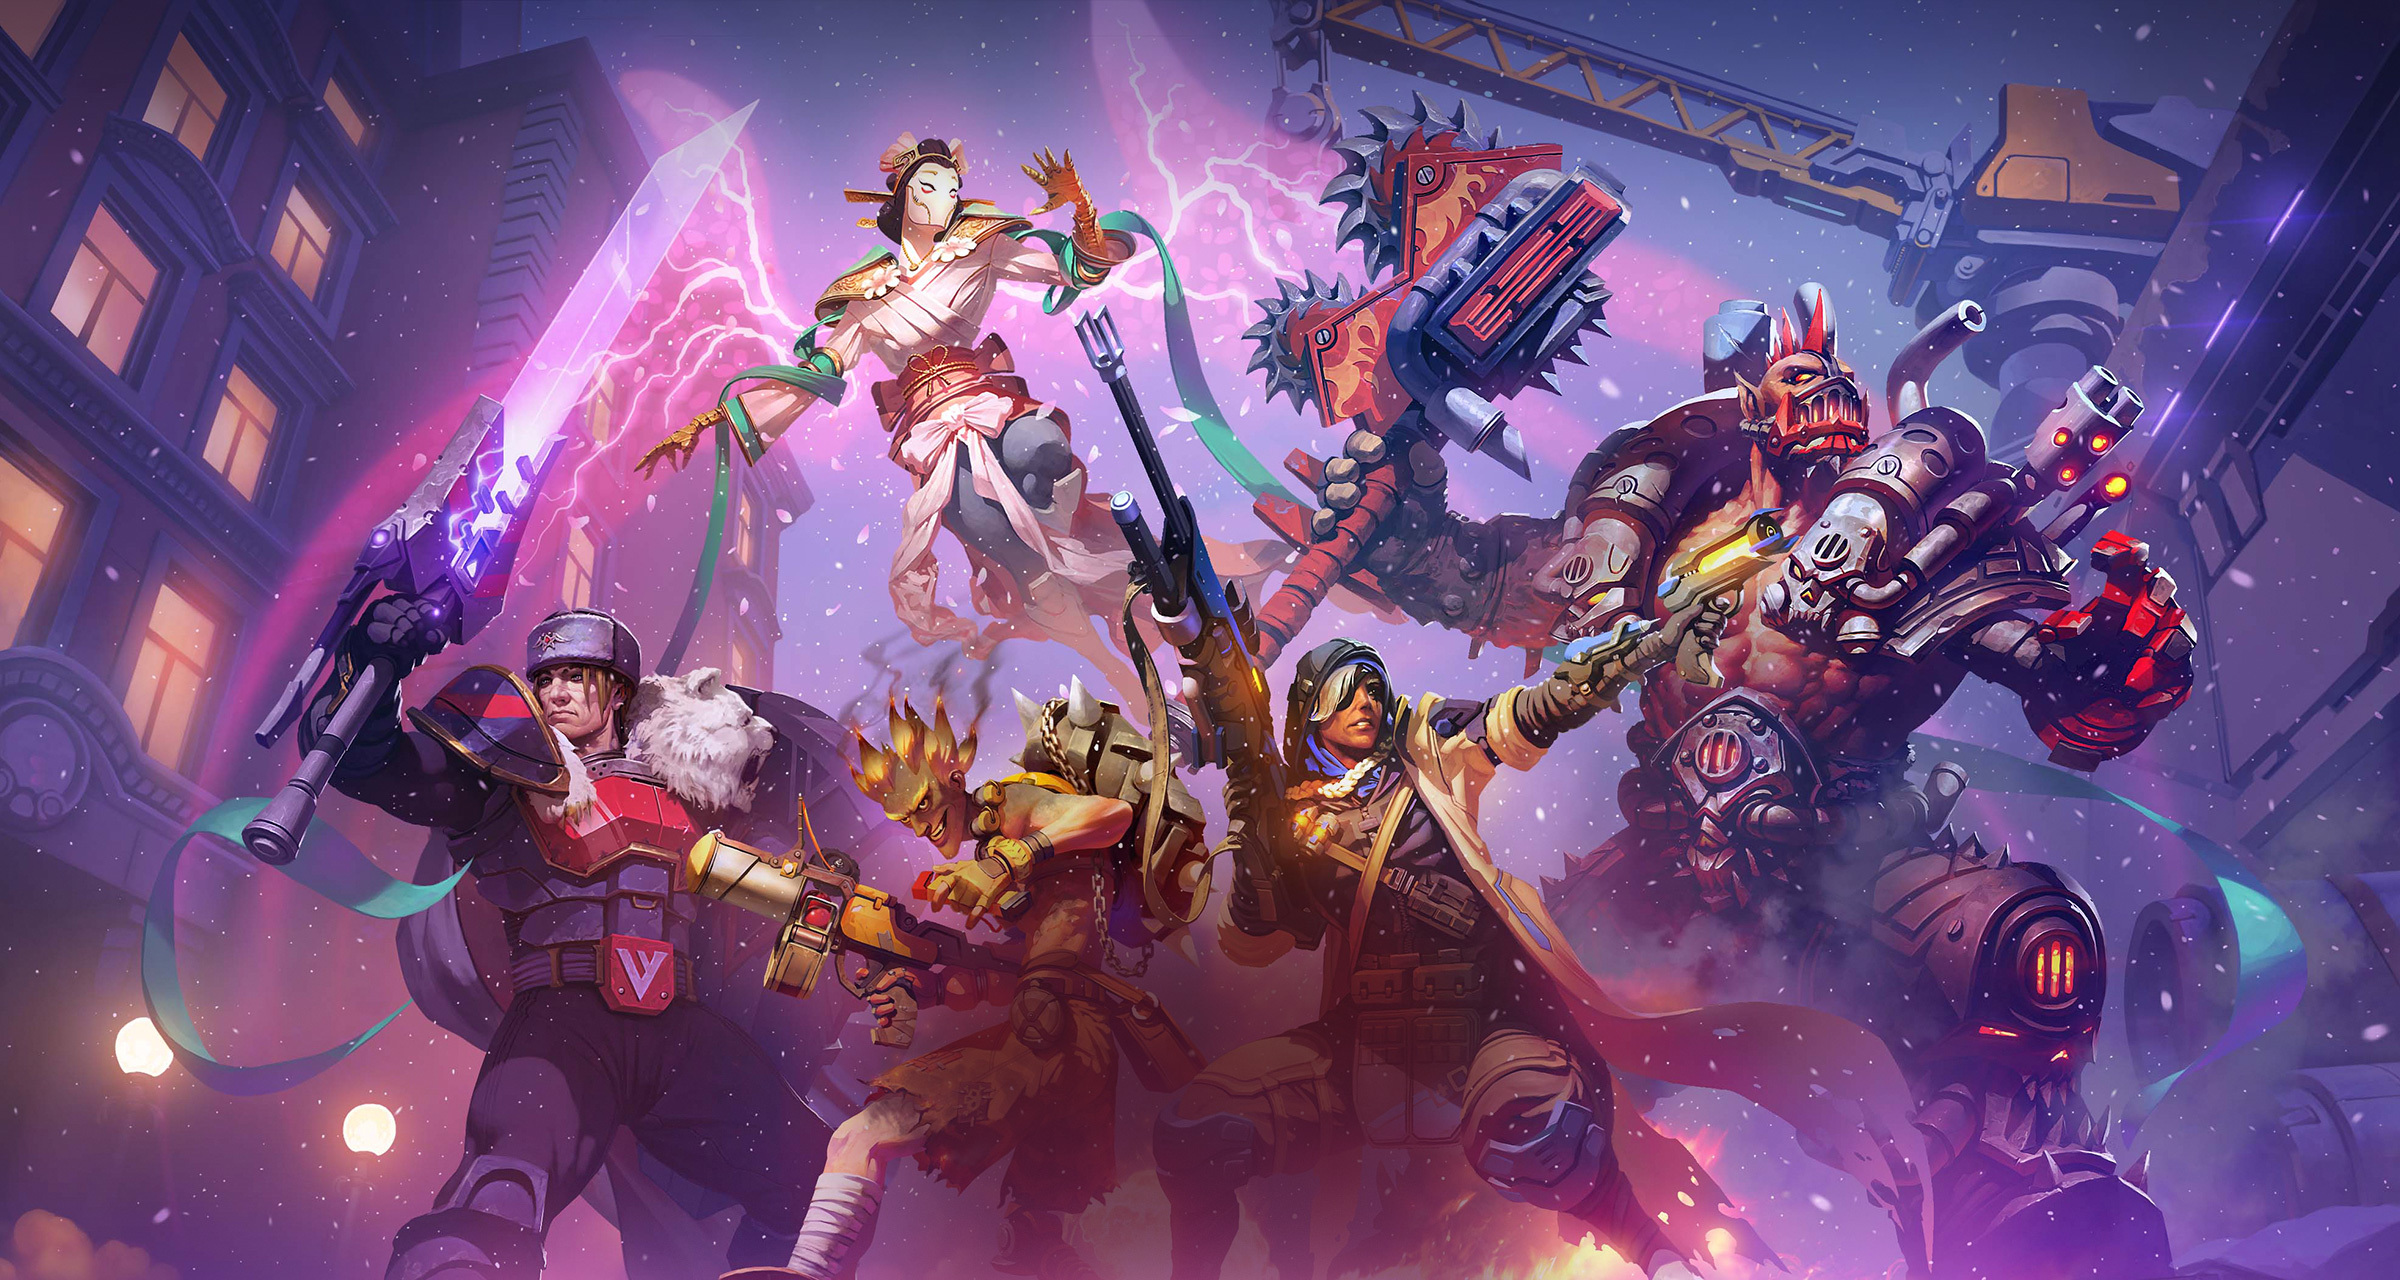 Overwatch Themed Update Heading for Heroes of the Storm